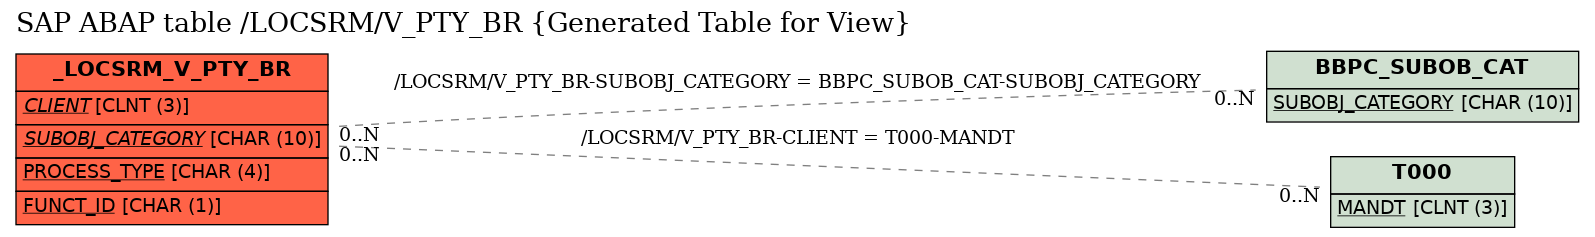 E-R Diagram for table /LOCSRM/V_PTY_BR (Generated Table for View)